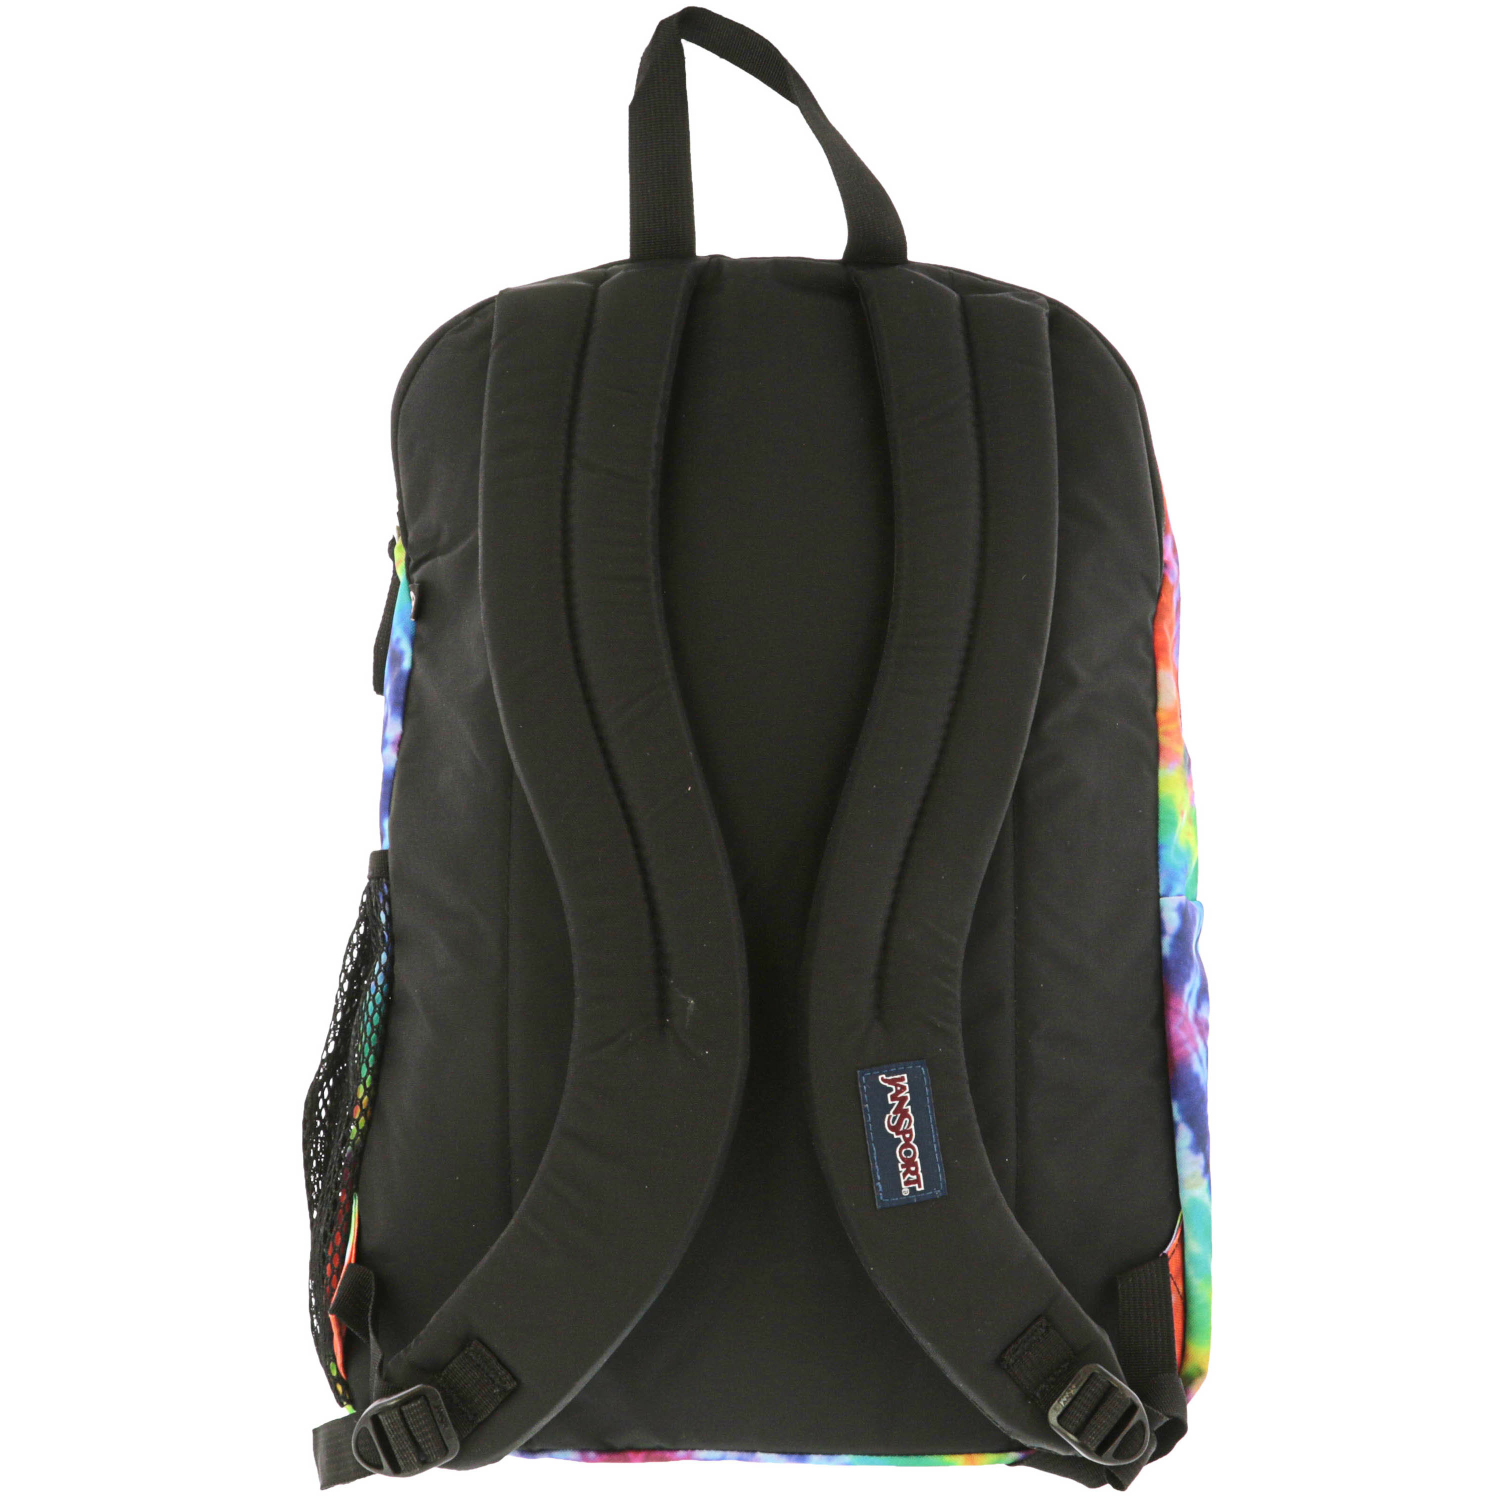 Jansport Big Student Polyester Backpack - Hippie Days Tie Dye - image 3 of 3